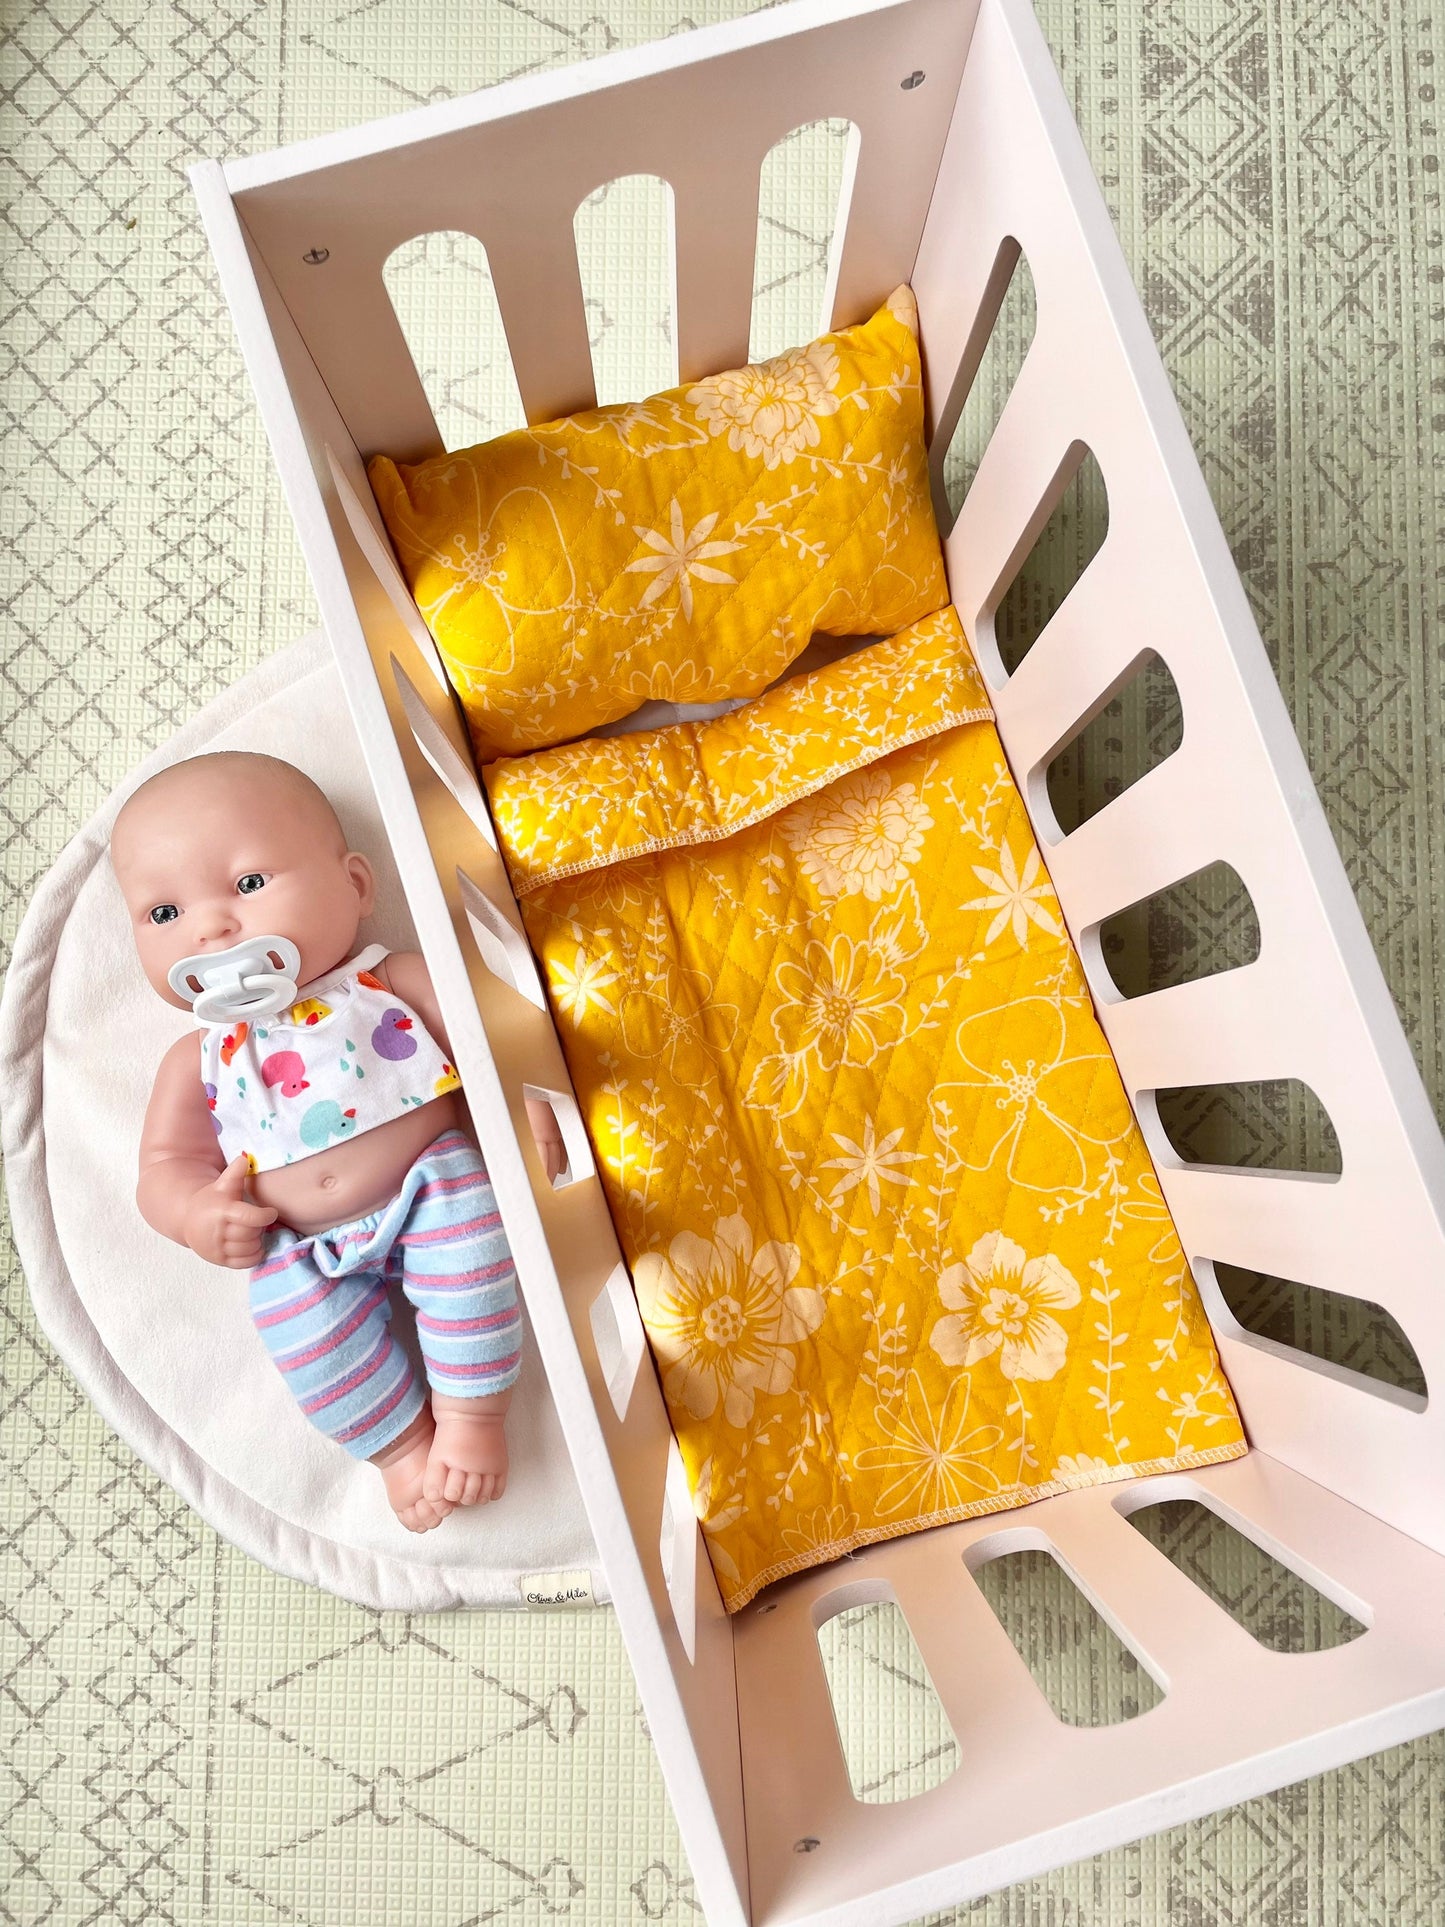 Mustard Yellow Quilted Doll Blanket Set | Dolls Bedding | Crib Set | Doll Bed | Christmas Gift For Girl